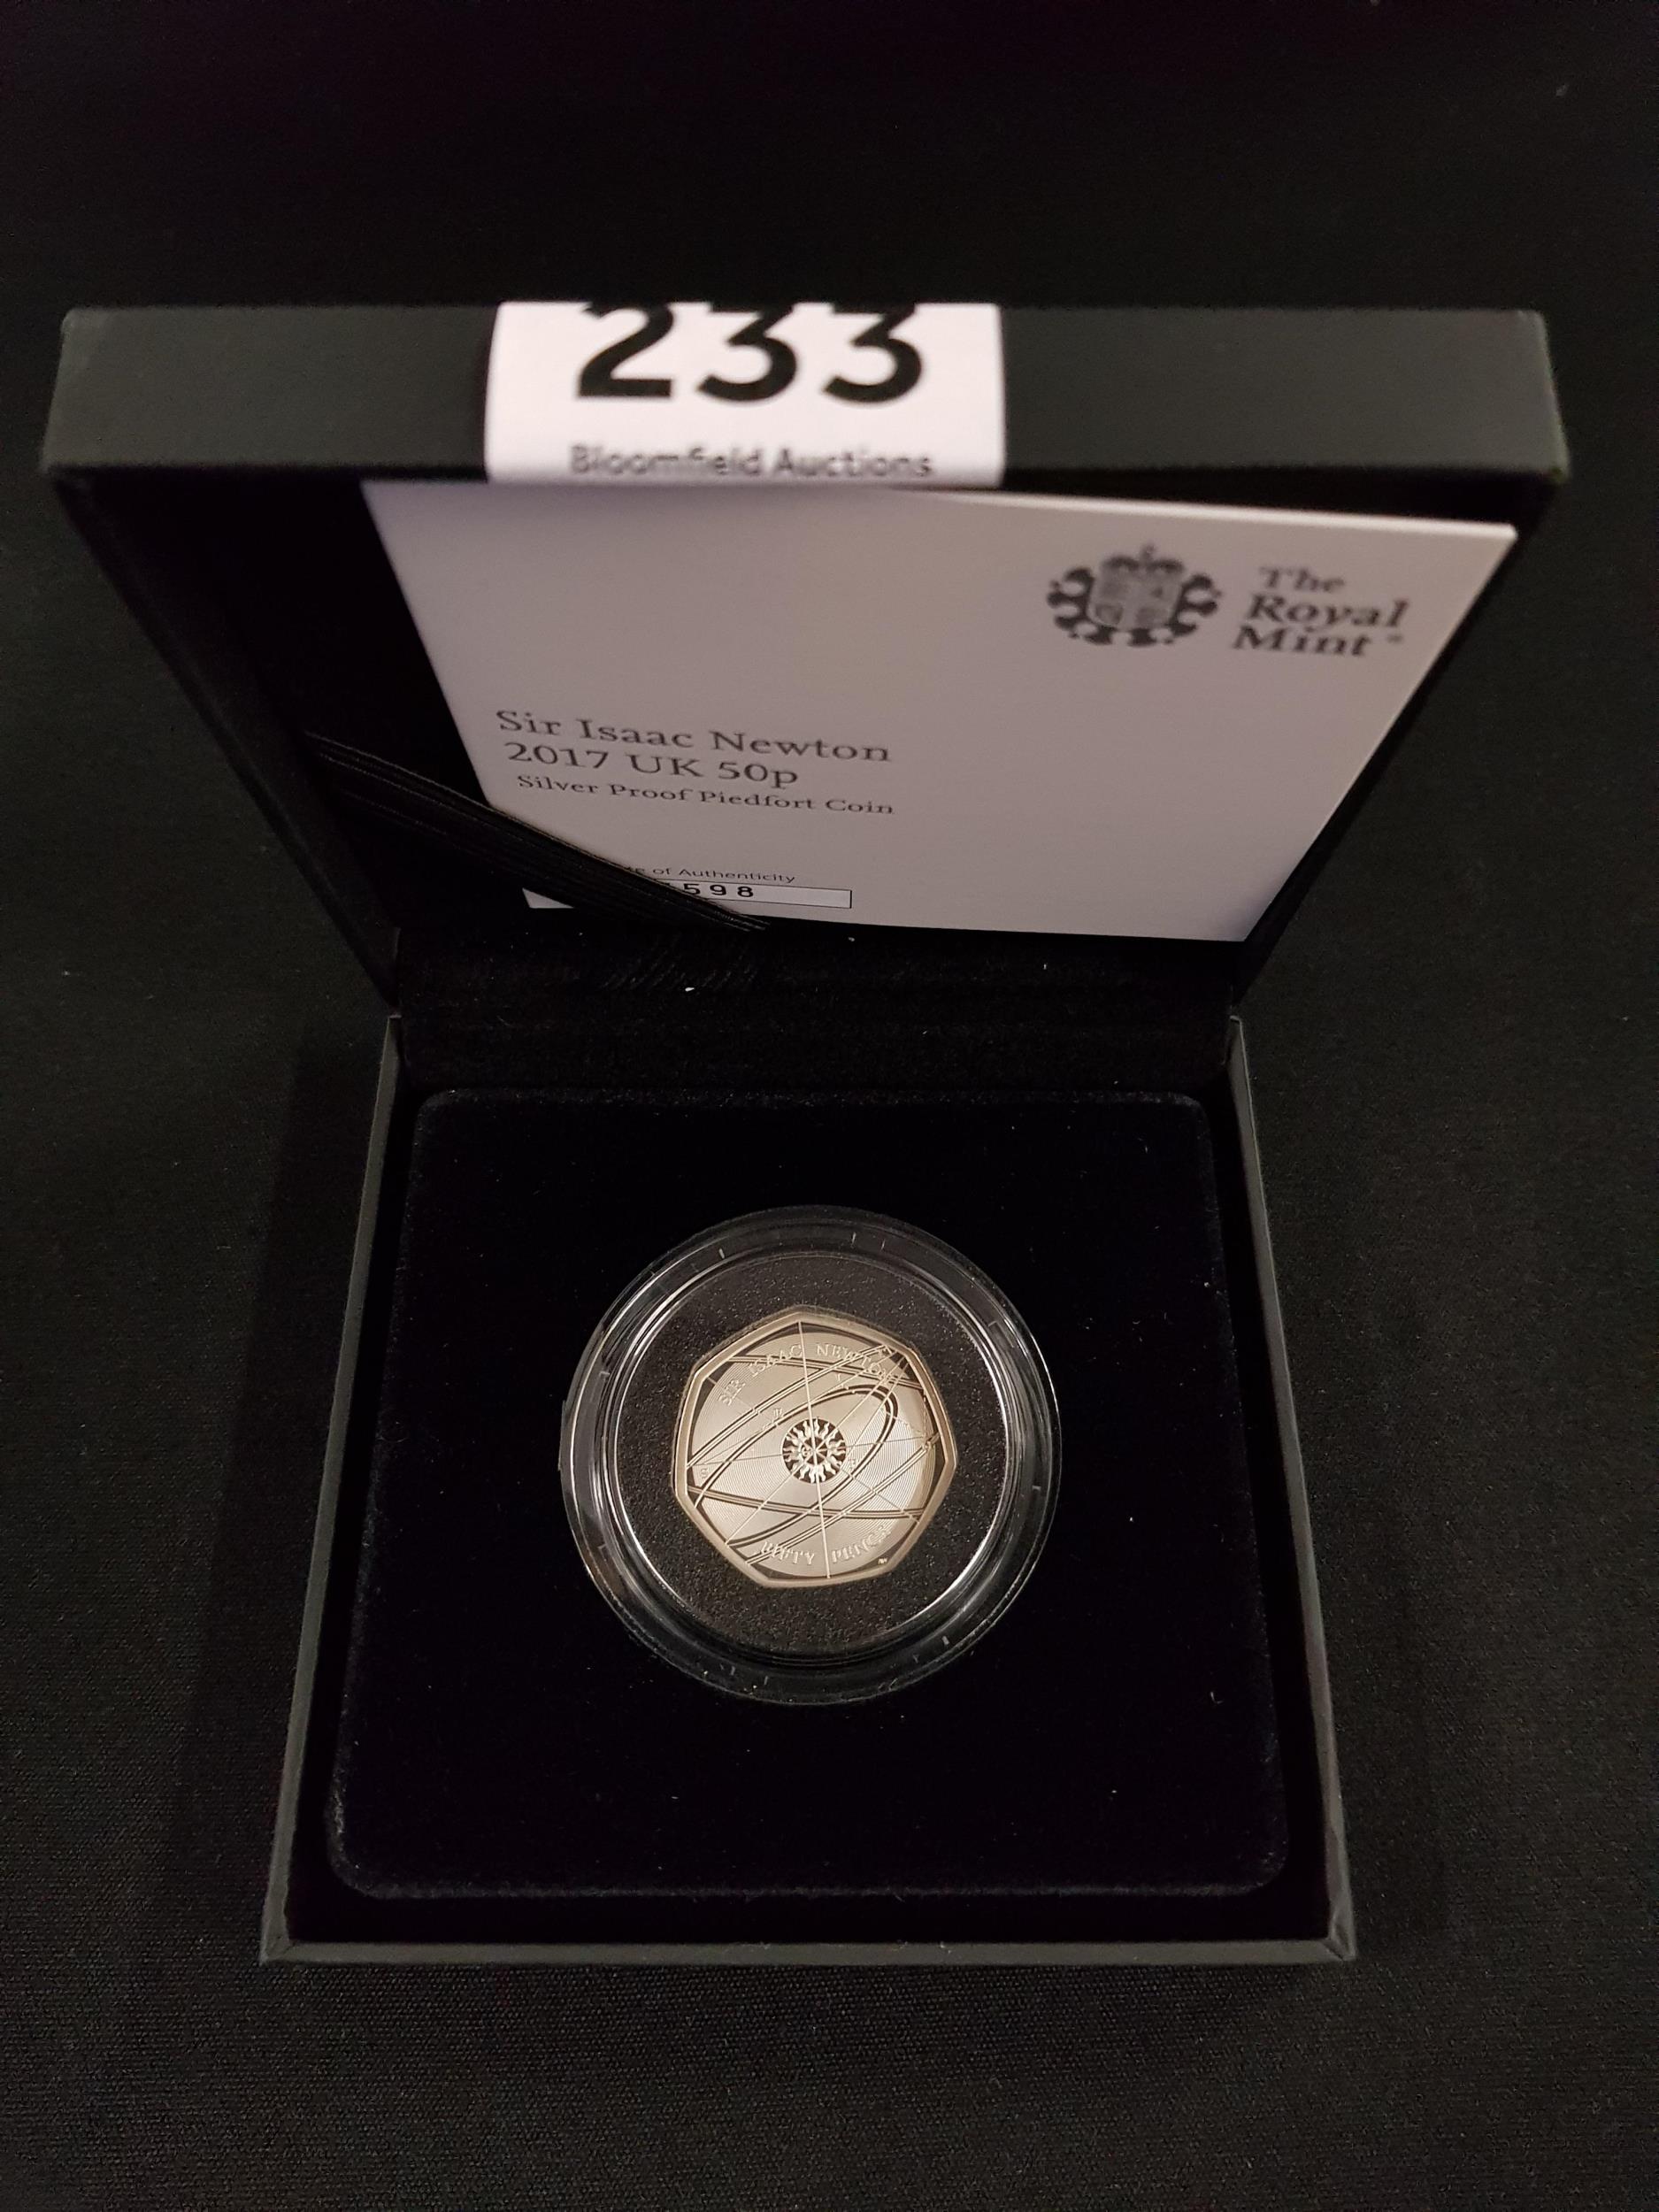 2017 SILVER PROOF PIEDFORT COIN ISAAC NEWTON 50P